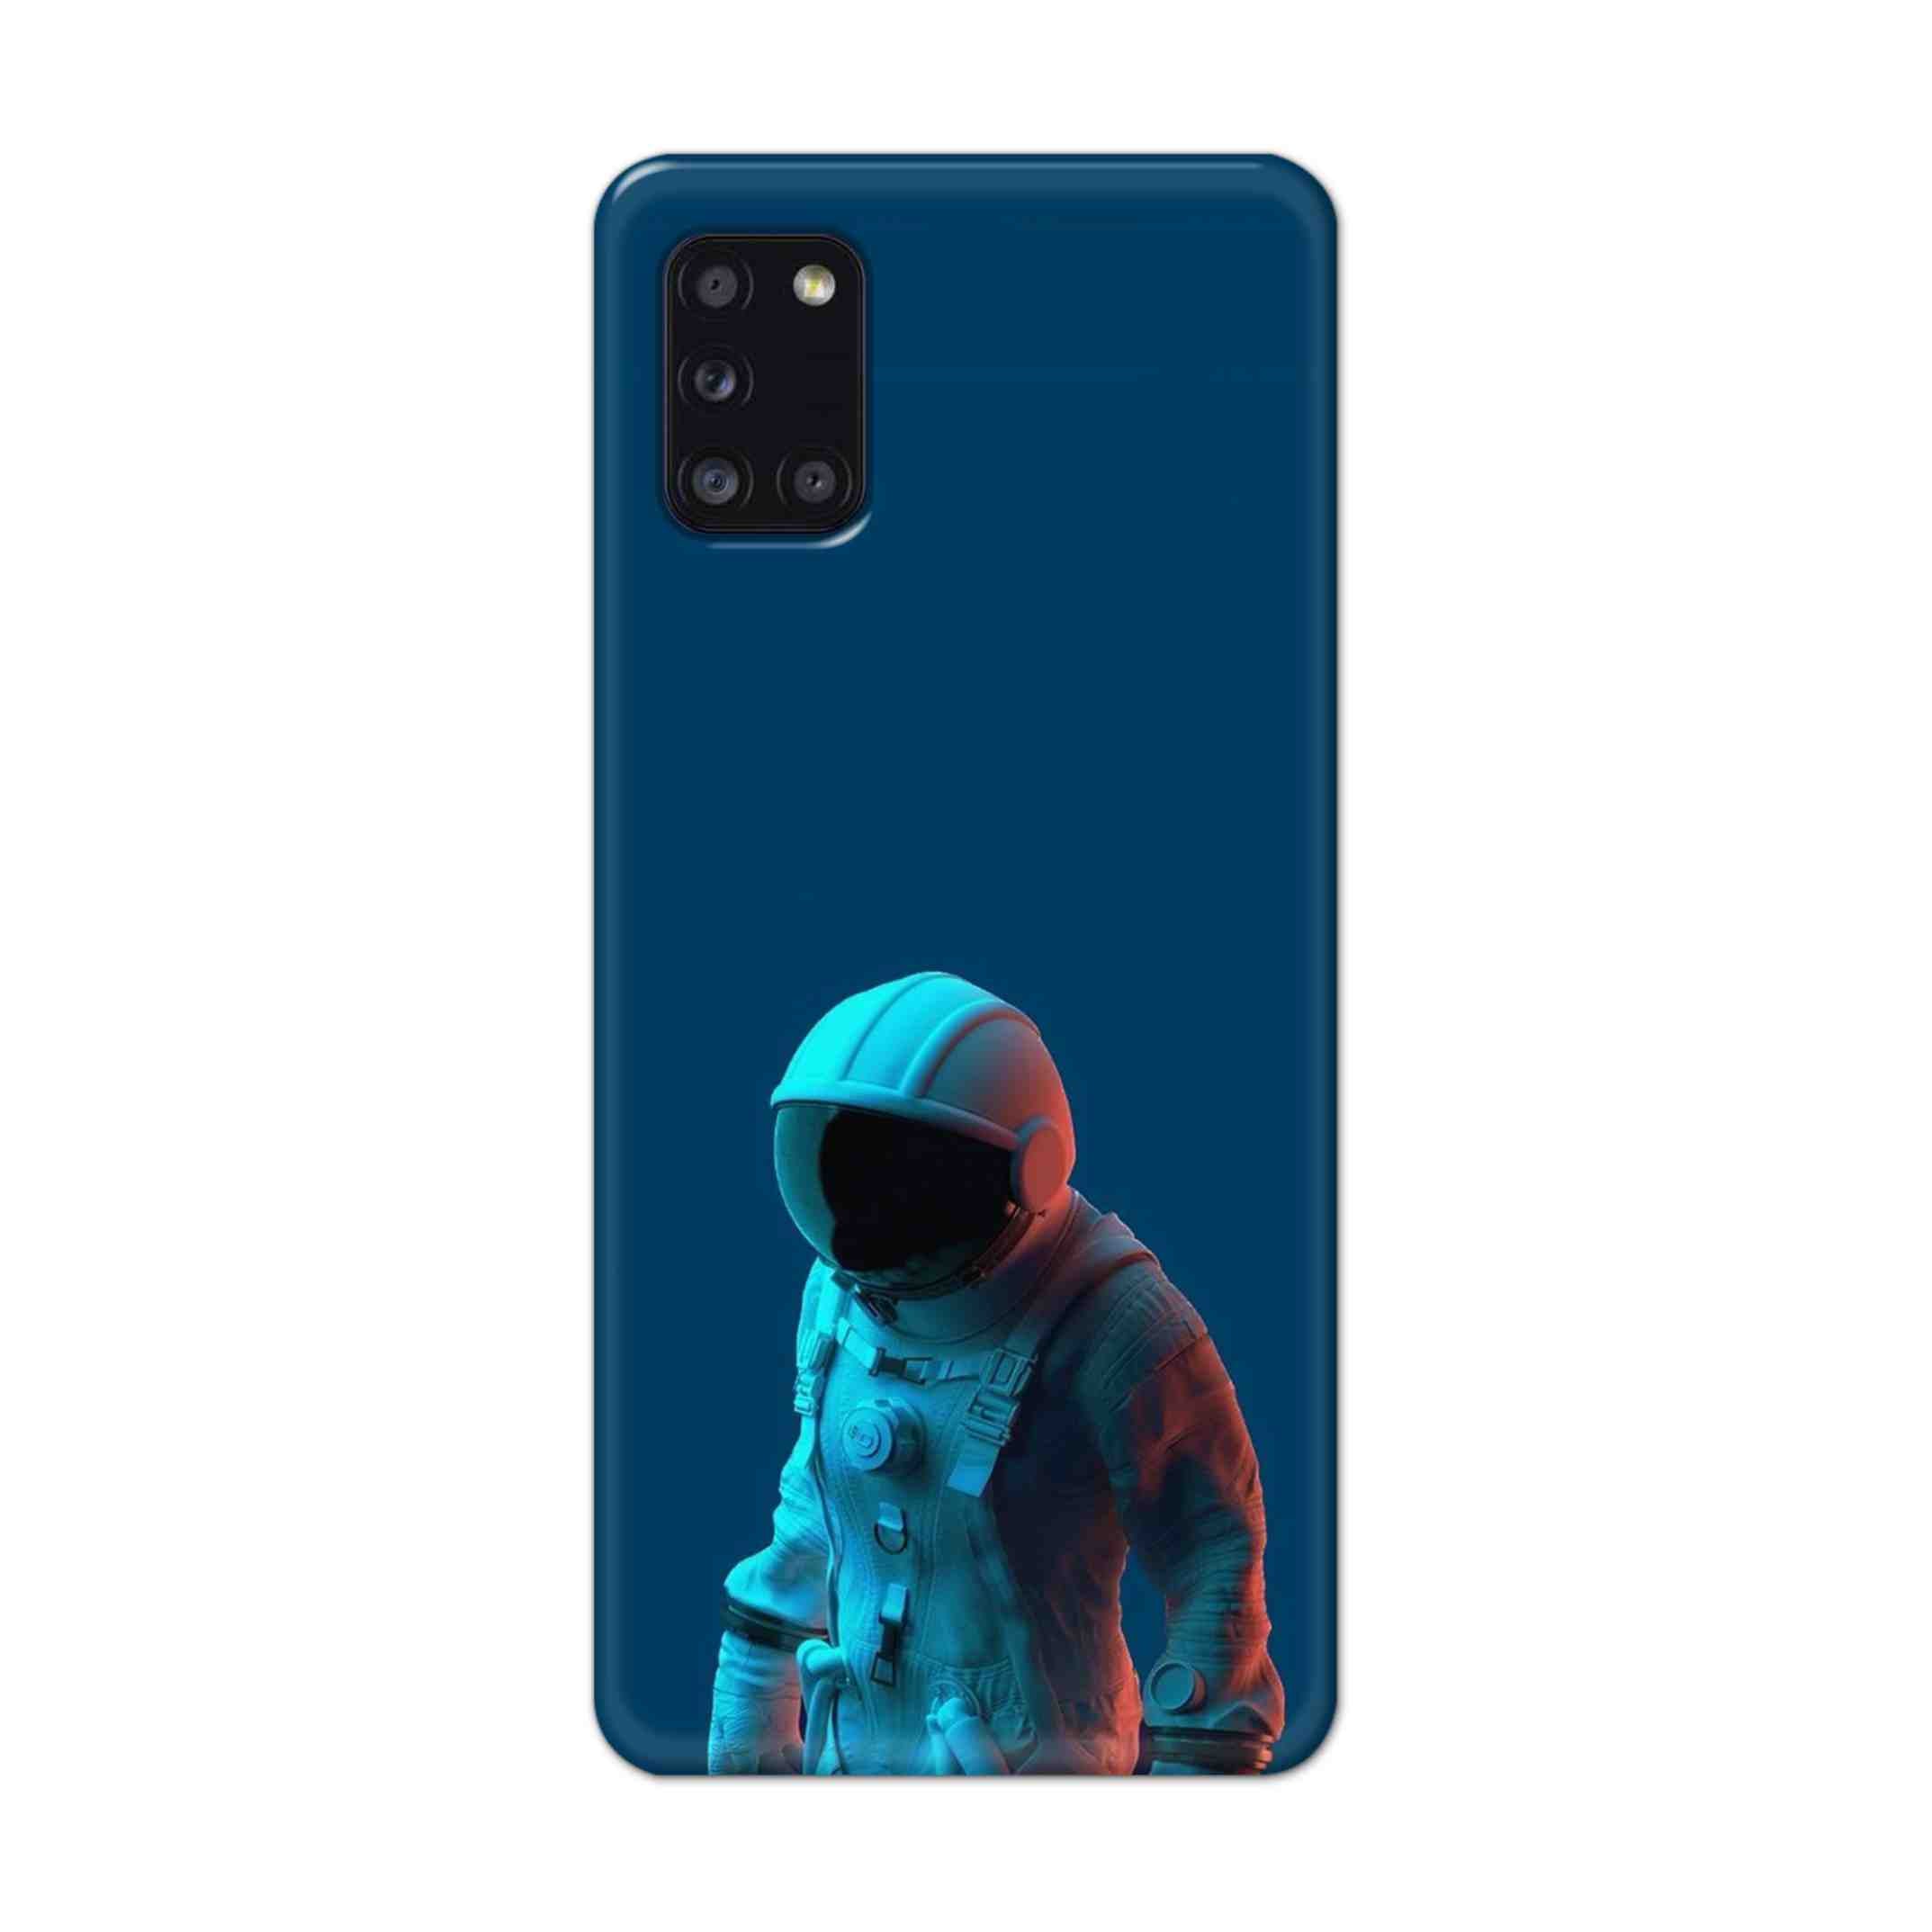 Buy Blue Astronaut Hard Back Mobile Phone Case Cover For Samsung Galaxy A31 Online